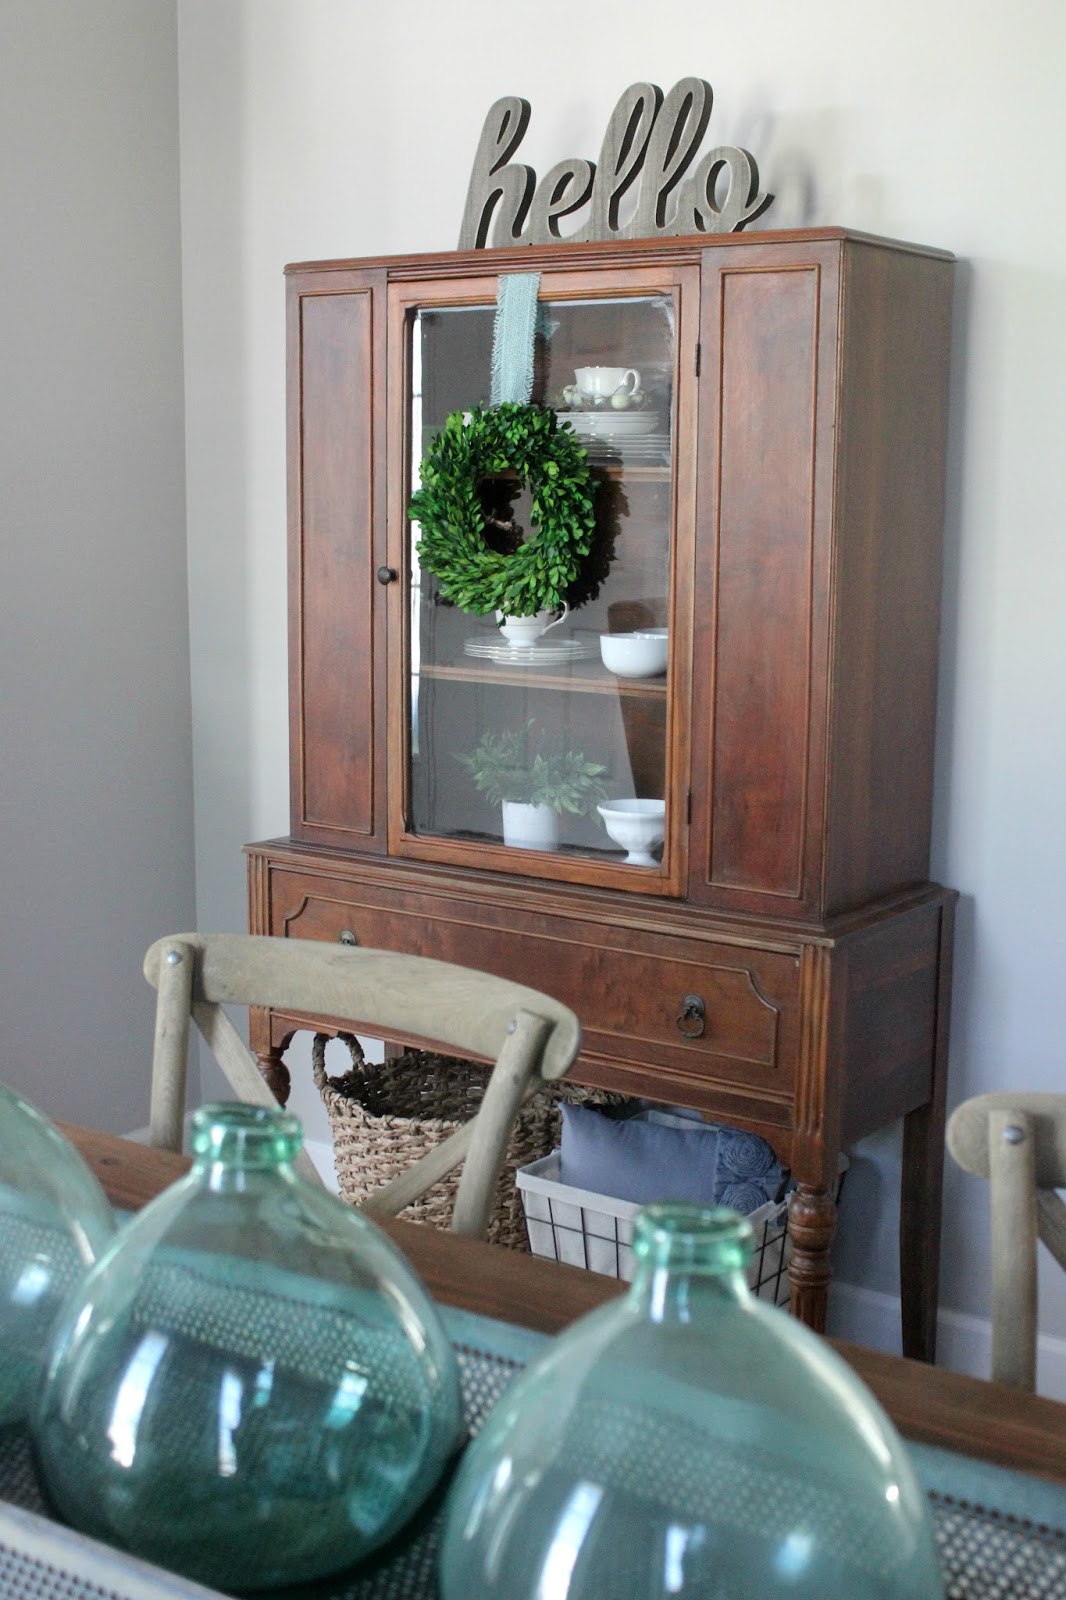 A simple three-ingredient recipe to get rid of that gross musty old furniture smell. Good to know if you love your antique furniture!